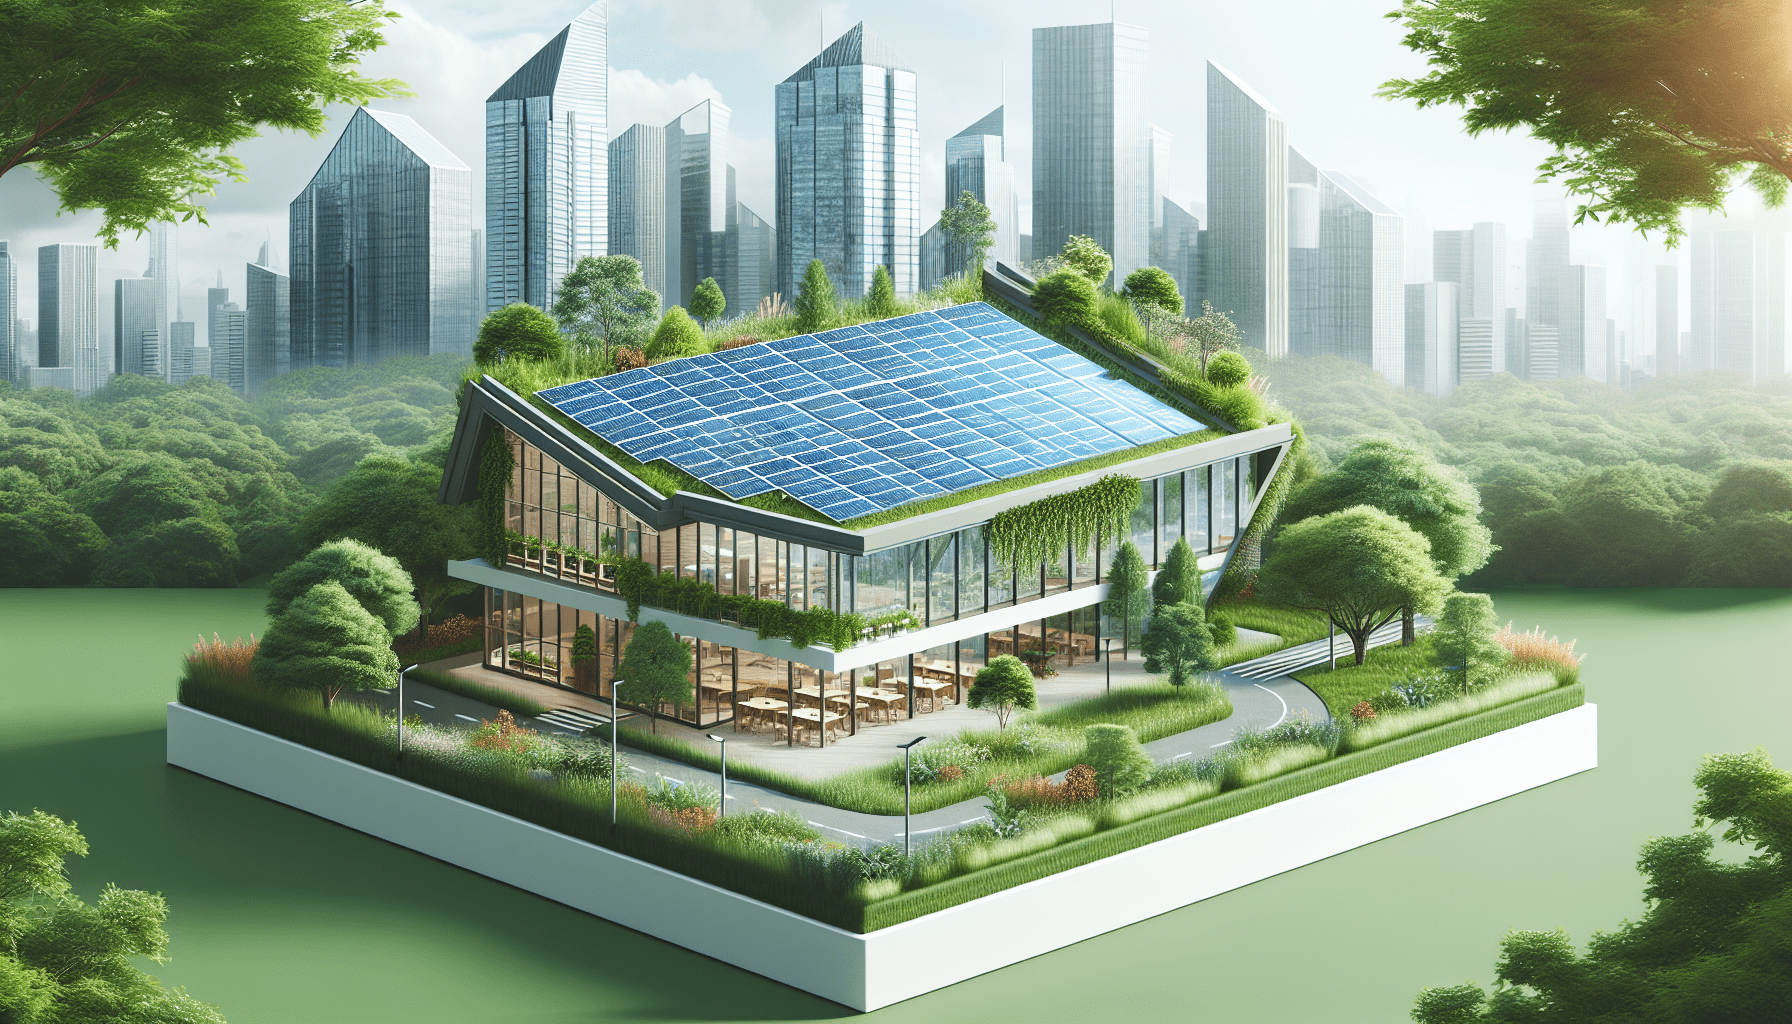 What Are Some Cost-effective Sustainable Design Solutions?